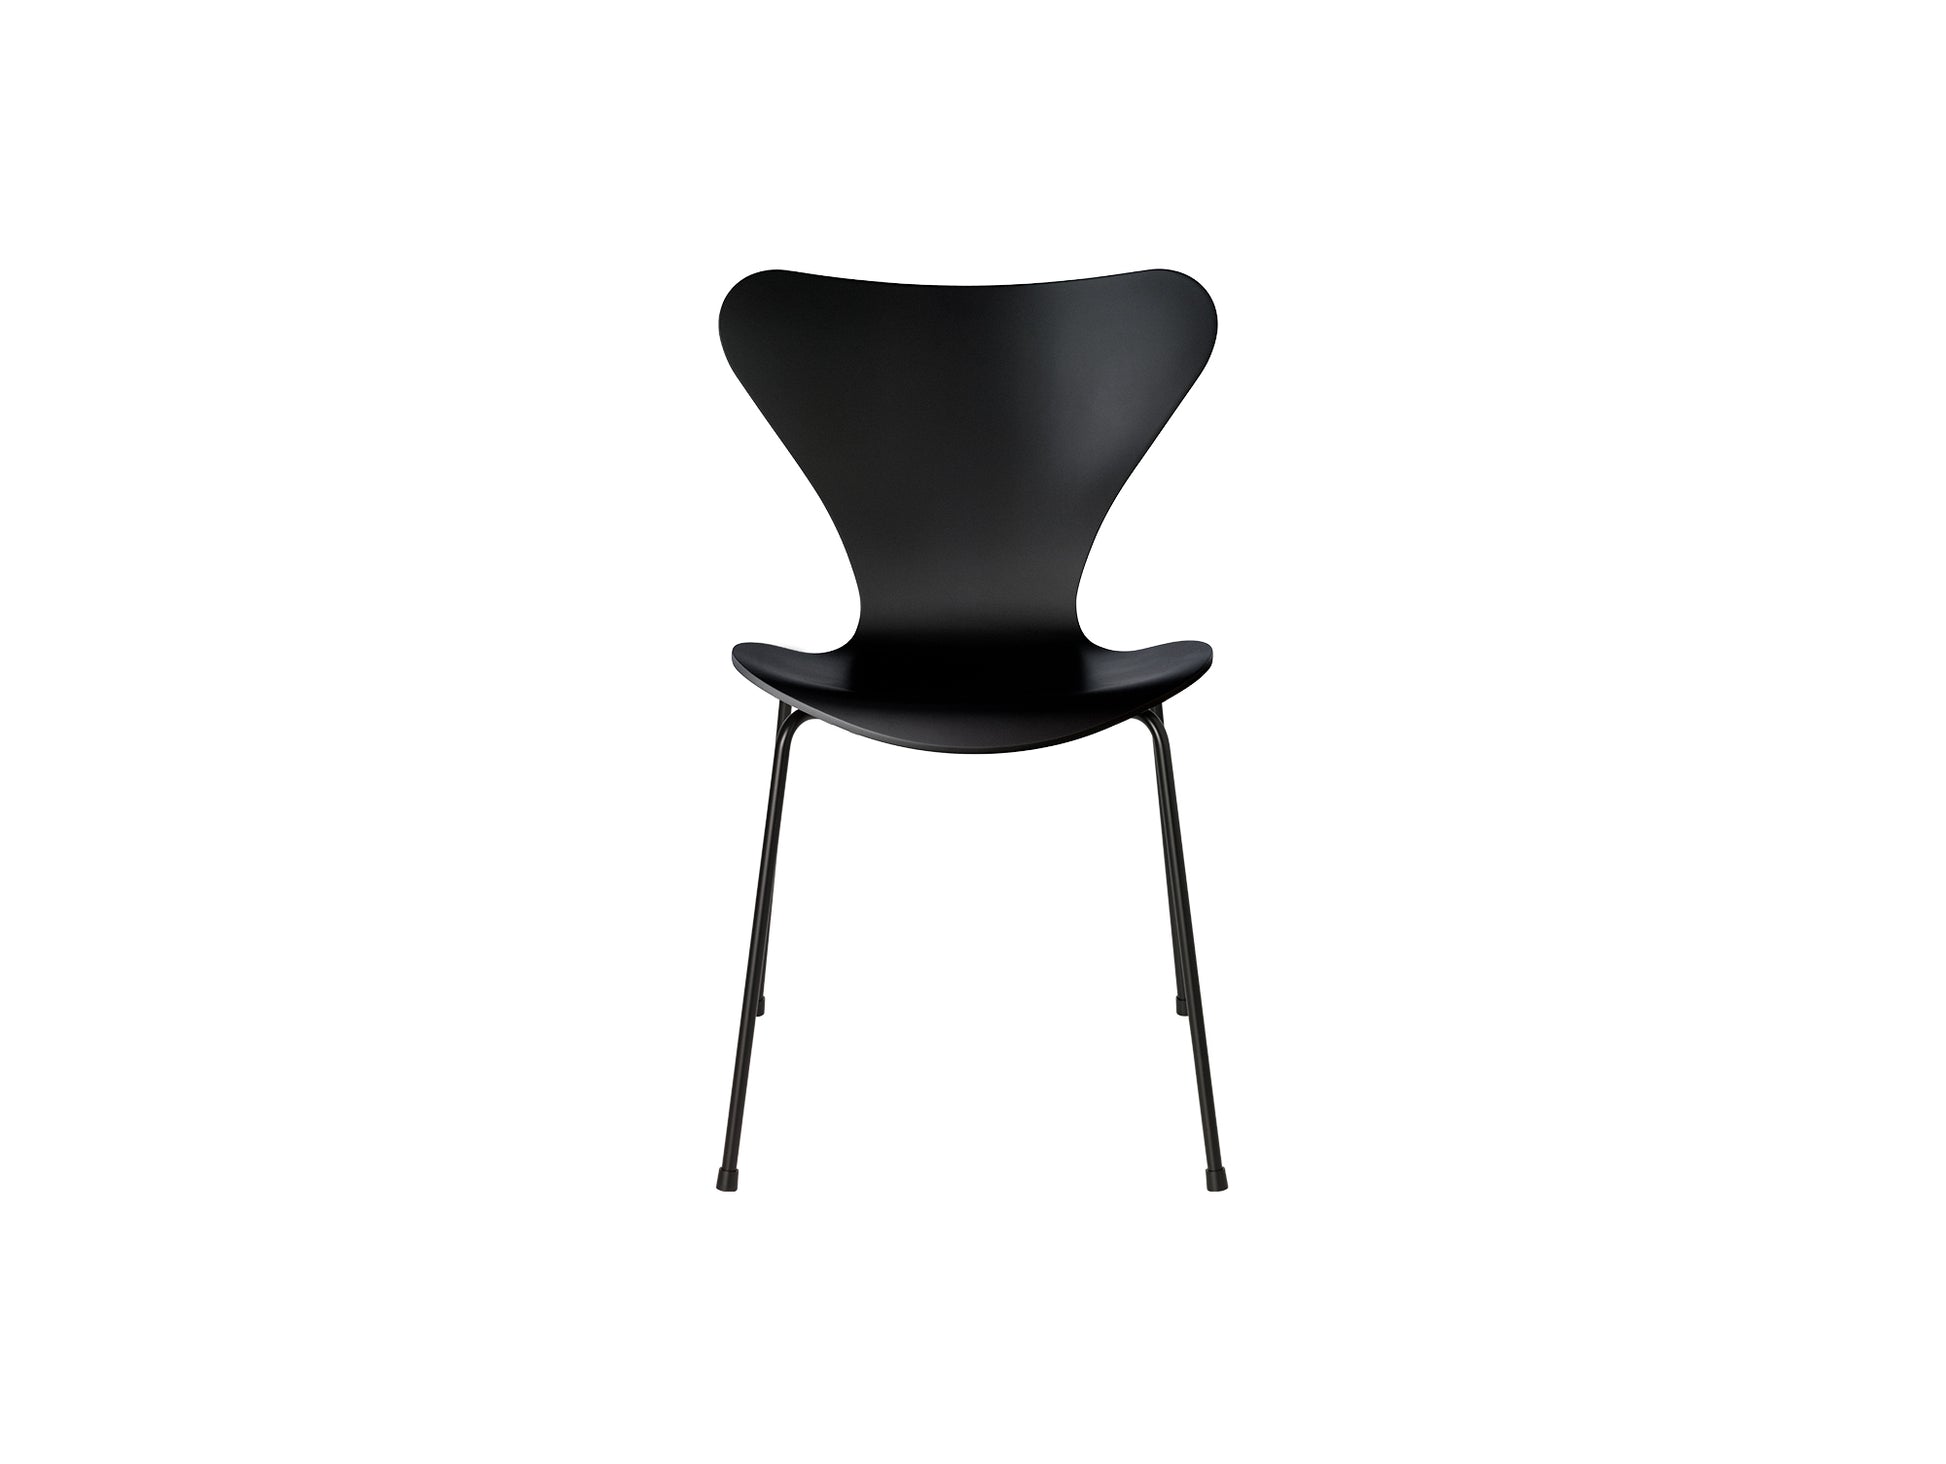 Series 7™ 3107 Dining Chair by Fritz Hansen - Black Lacquered Veneer Shell / Black Steel